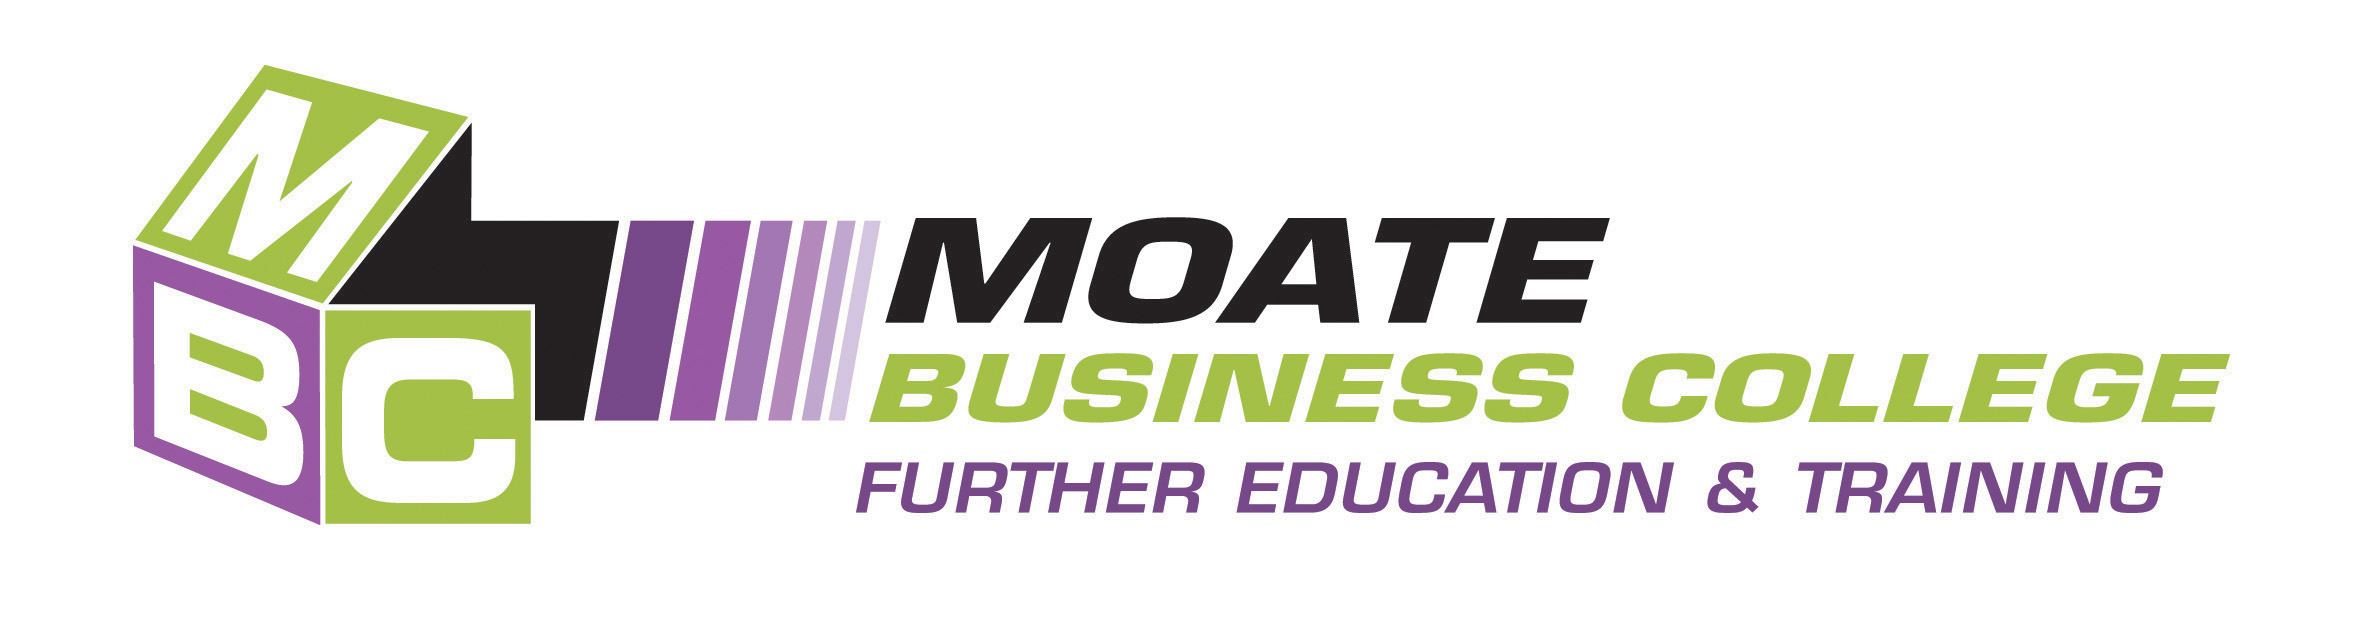 Moate Business College Ireland